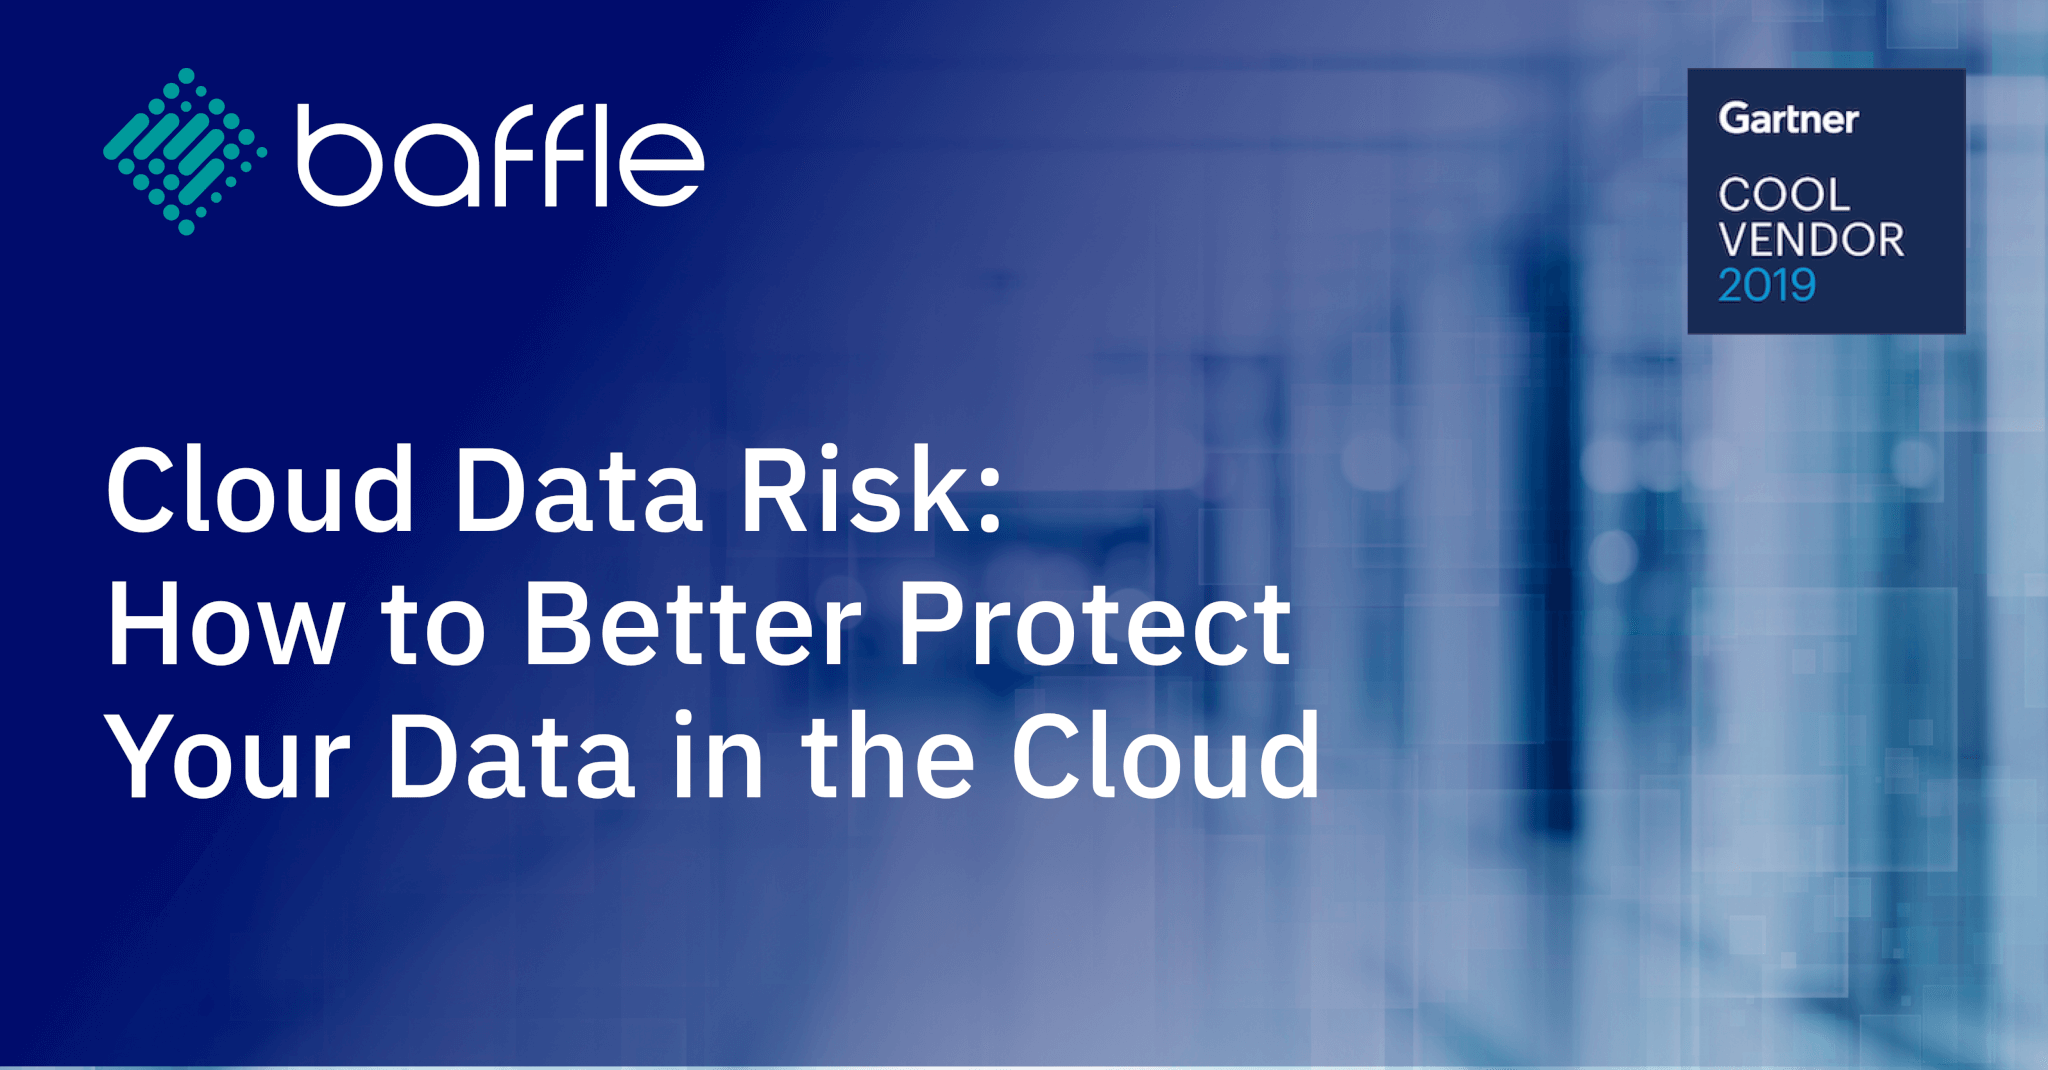 Cloud Data Risk: How to Better Protect Your Data in the Cloud Image